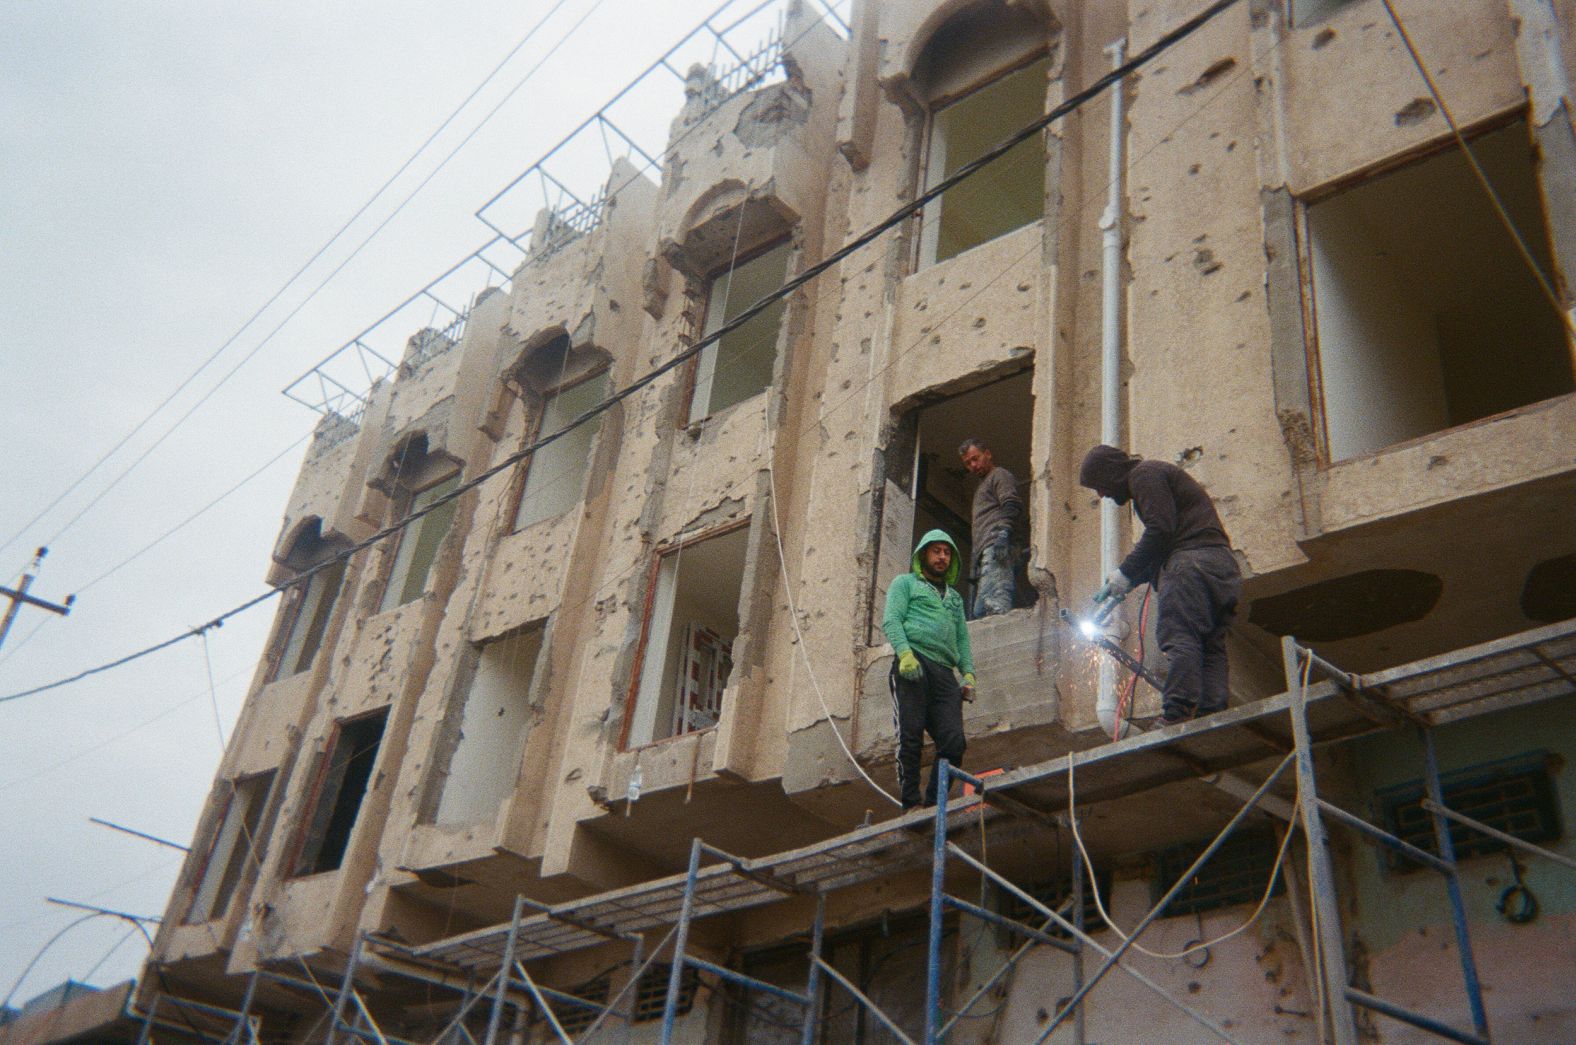 Men work to restore a building still riddled with bullet holes after being damaged in the <a href="http://www.cnn.com/2004/WORLD/meast/11/08/iraq.main/" target="_blank">Second Battle for Falluja</a> in November 2004.<br /><br />Nawfel, the photographer, was just 9 months old when this happened, but he said his family had to flee the city to escape the war. "I am 19 years old, so I don't really remember much about major events in Iraq," he said.<br /><br />But he does remember the war against ISIS and the <a href="https://www.cnn.com/2019/10/02/world/iraq-protests-baghdad-intl/index.html" target="_blank">2019 mass protests</a> he participated in against unemployment, government corruption and the lack of basic services.<br /><br />"My parents told me some stories about life before the US invasion to Iraq," he said. "The city of Falluja used to be more organized, much cleaner and most importantly it used to be safer. Things are getting better but very slowly."